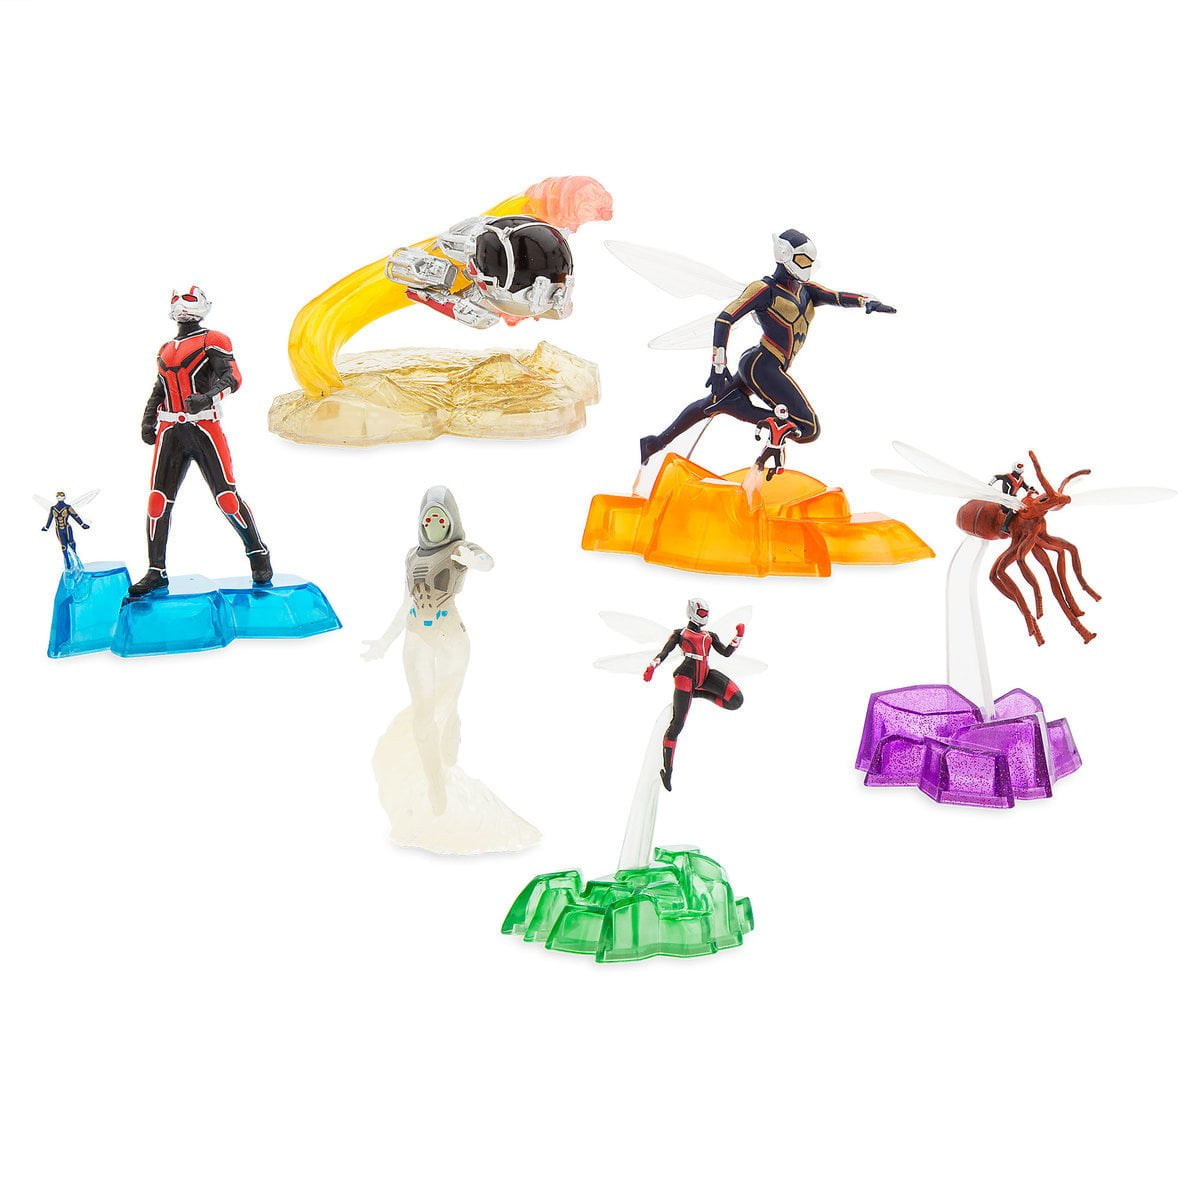 Disney Marvel Ant-Man and The Wasp Figure Play Set 6 pc Without Box Package 